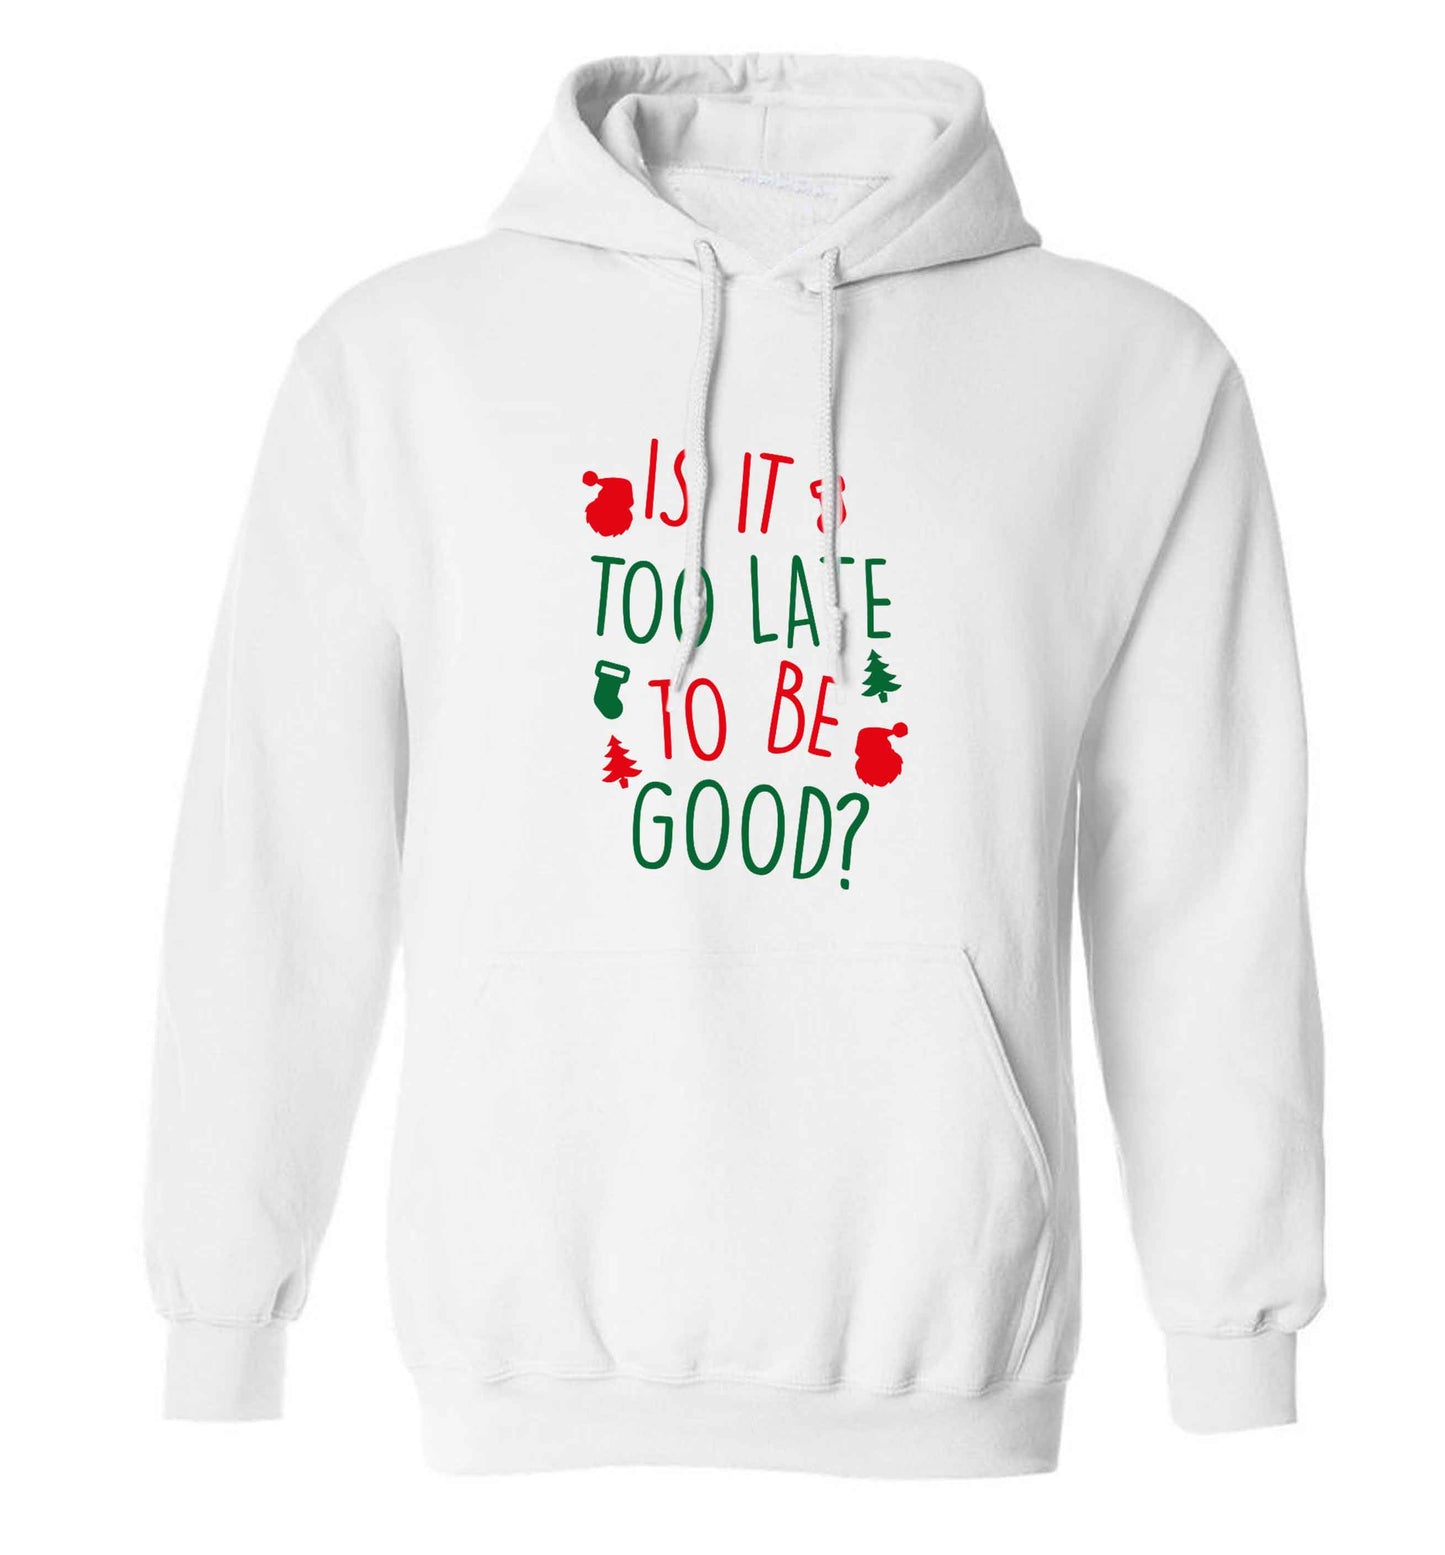 Too Late to be Good adults unisex white hoodie 2XL